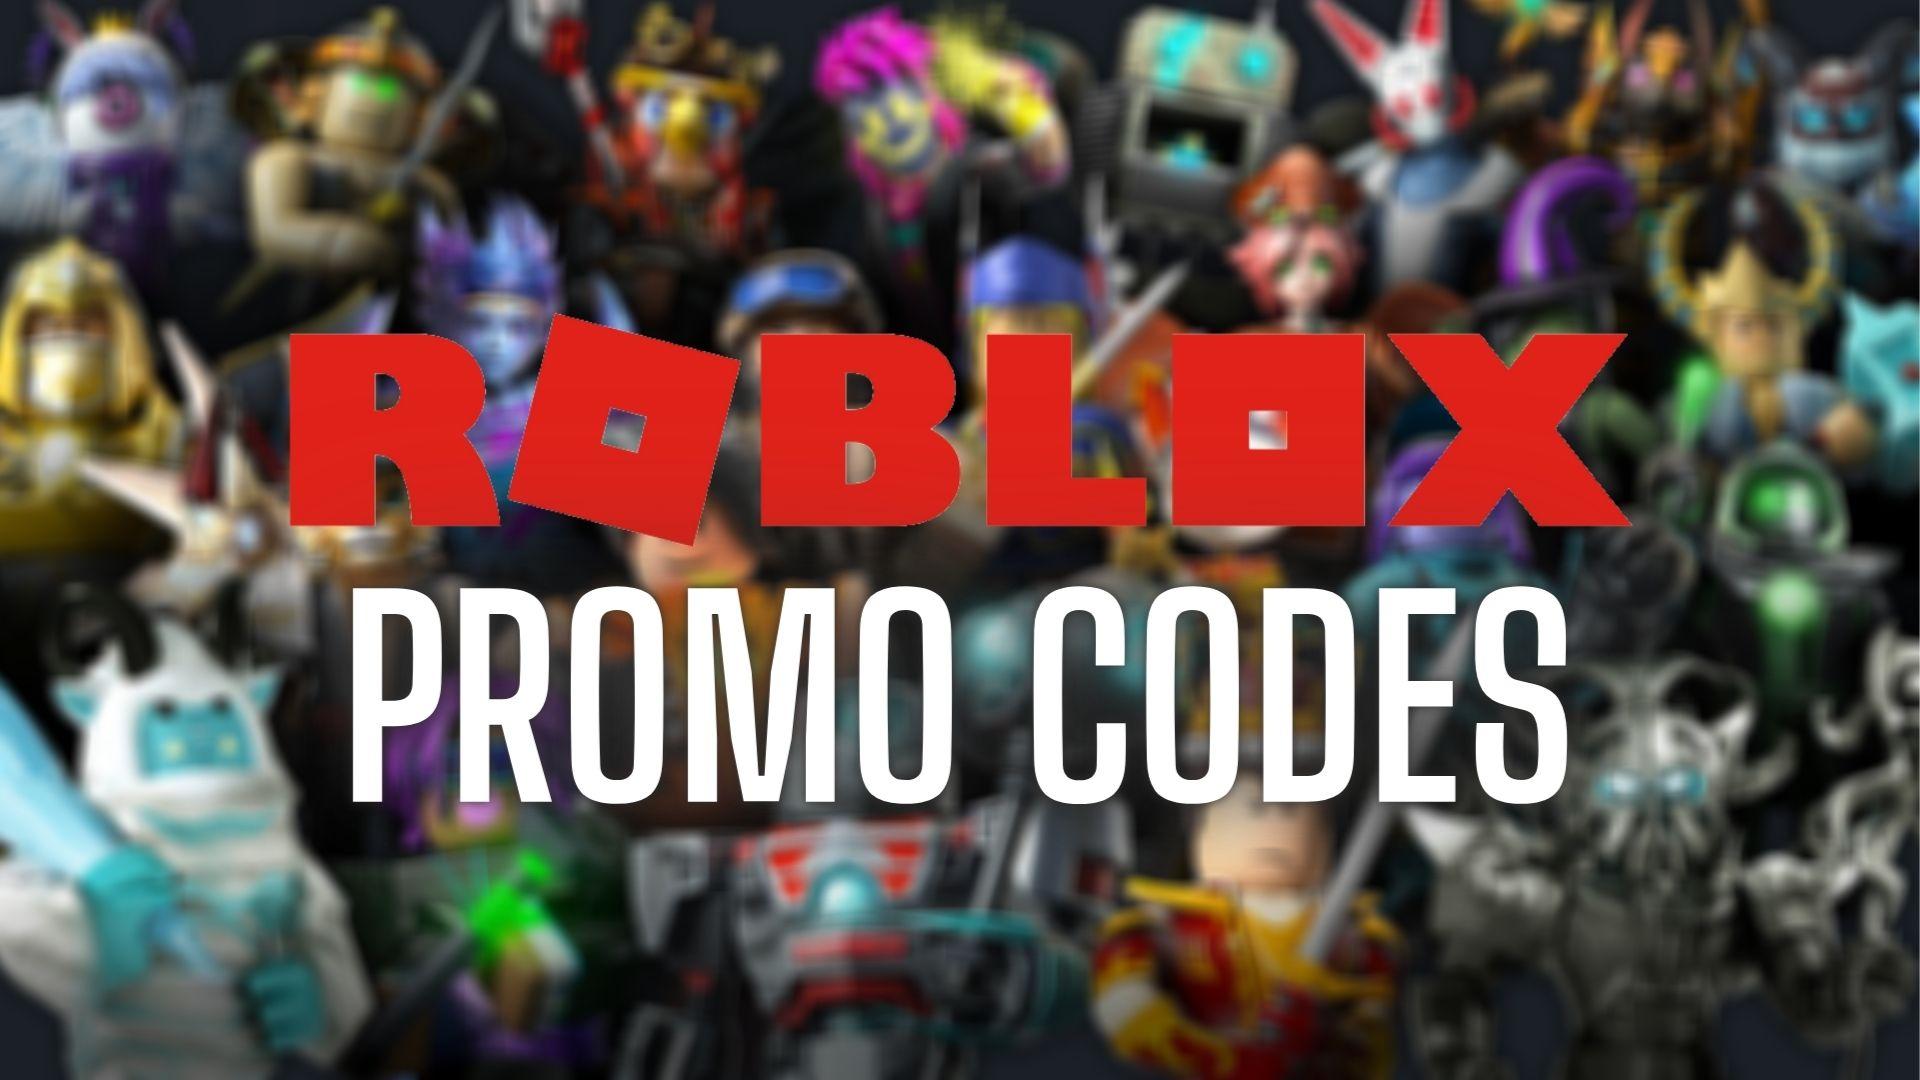 Text that says 'Roblox promo codes' with a blurred background of different items in the game